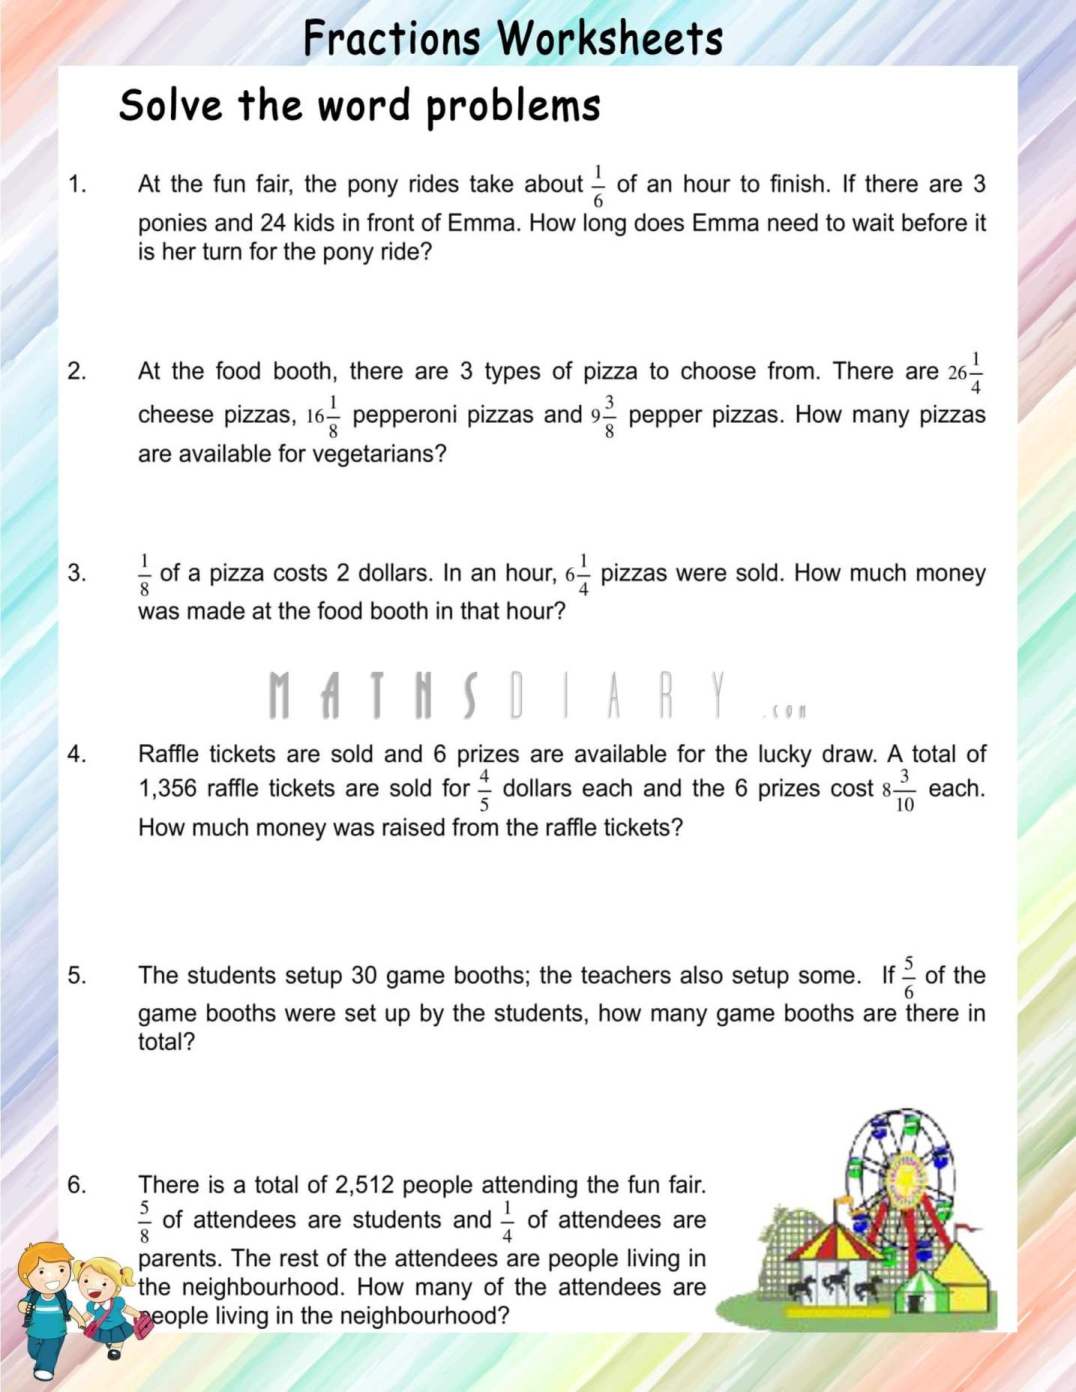 fractions-word-problems-with-four-operations-worksheets-math-worksheets-mathsdiary